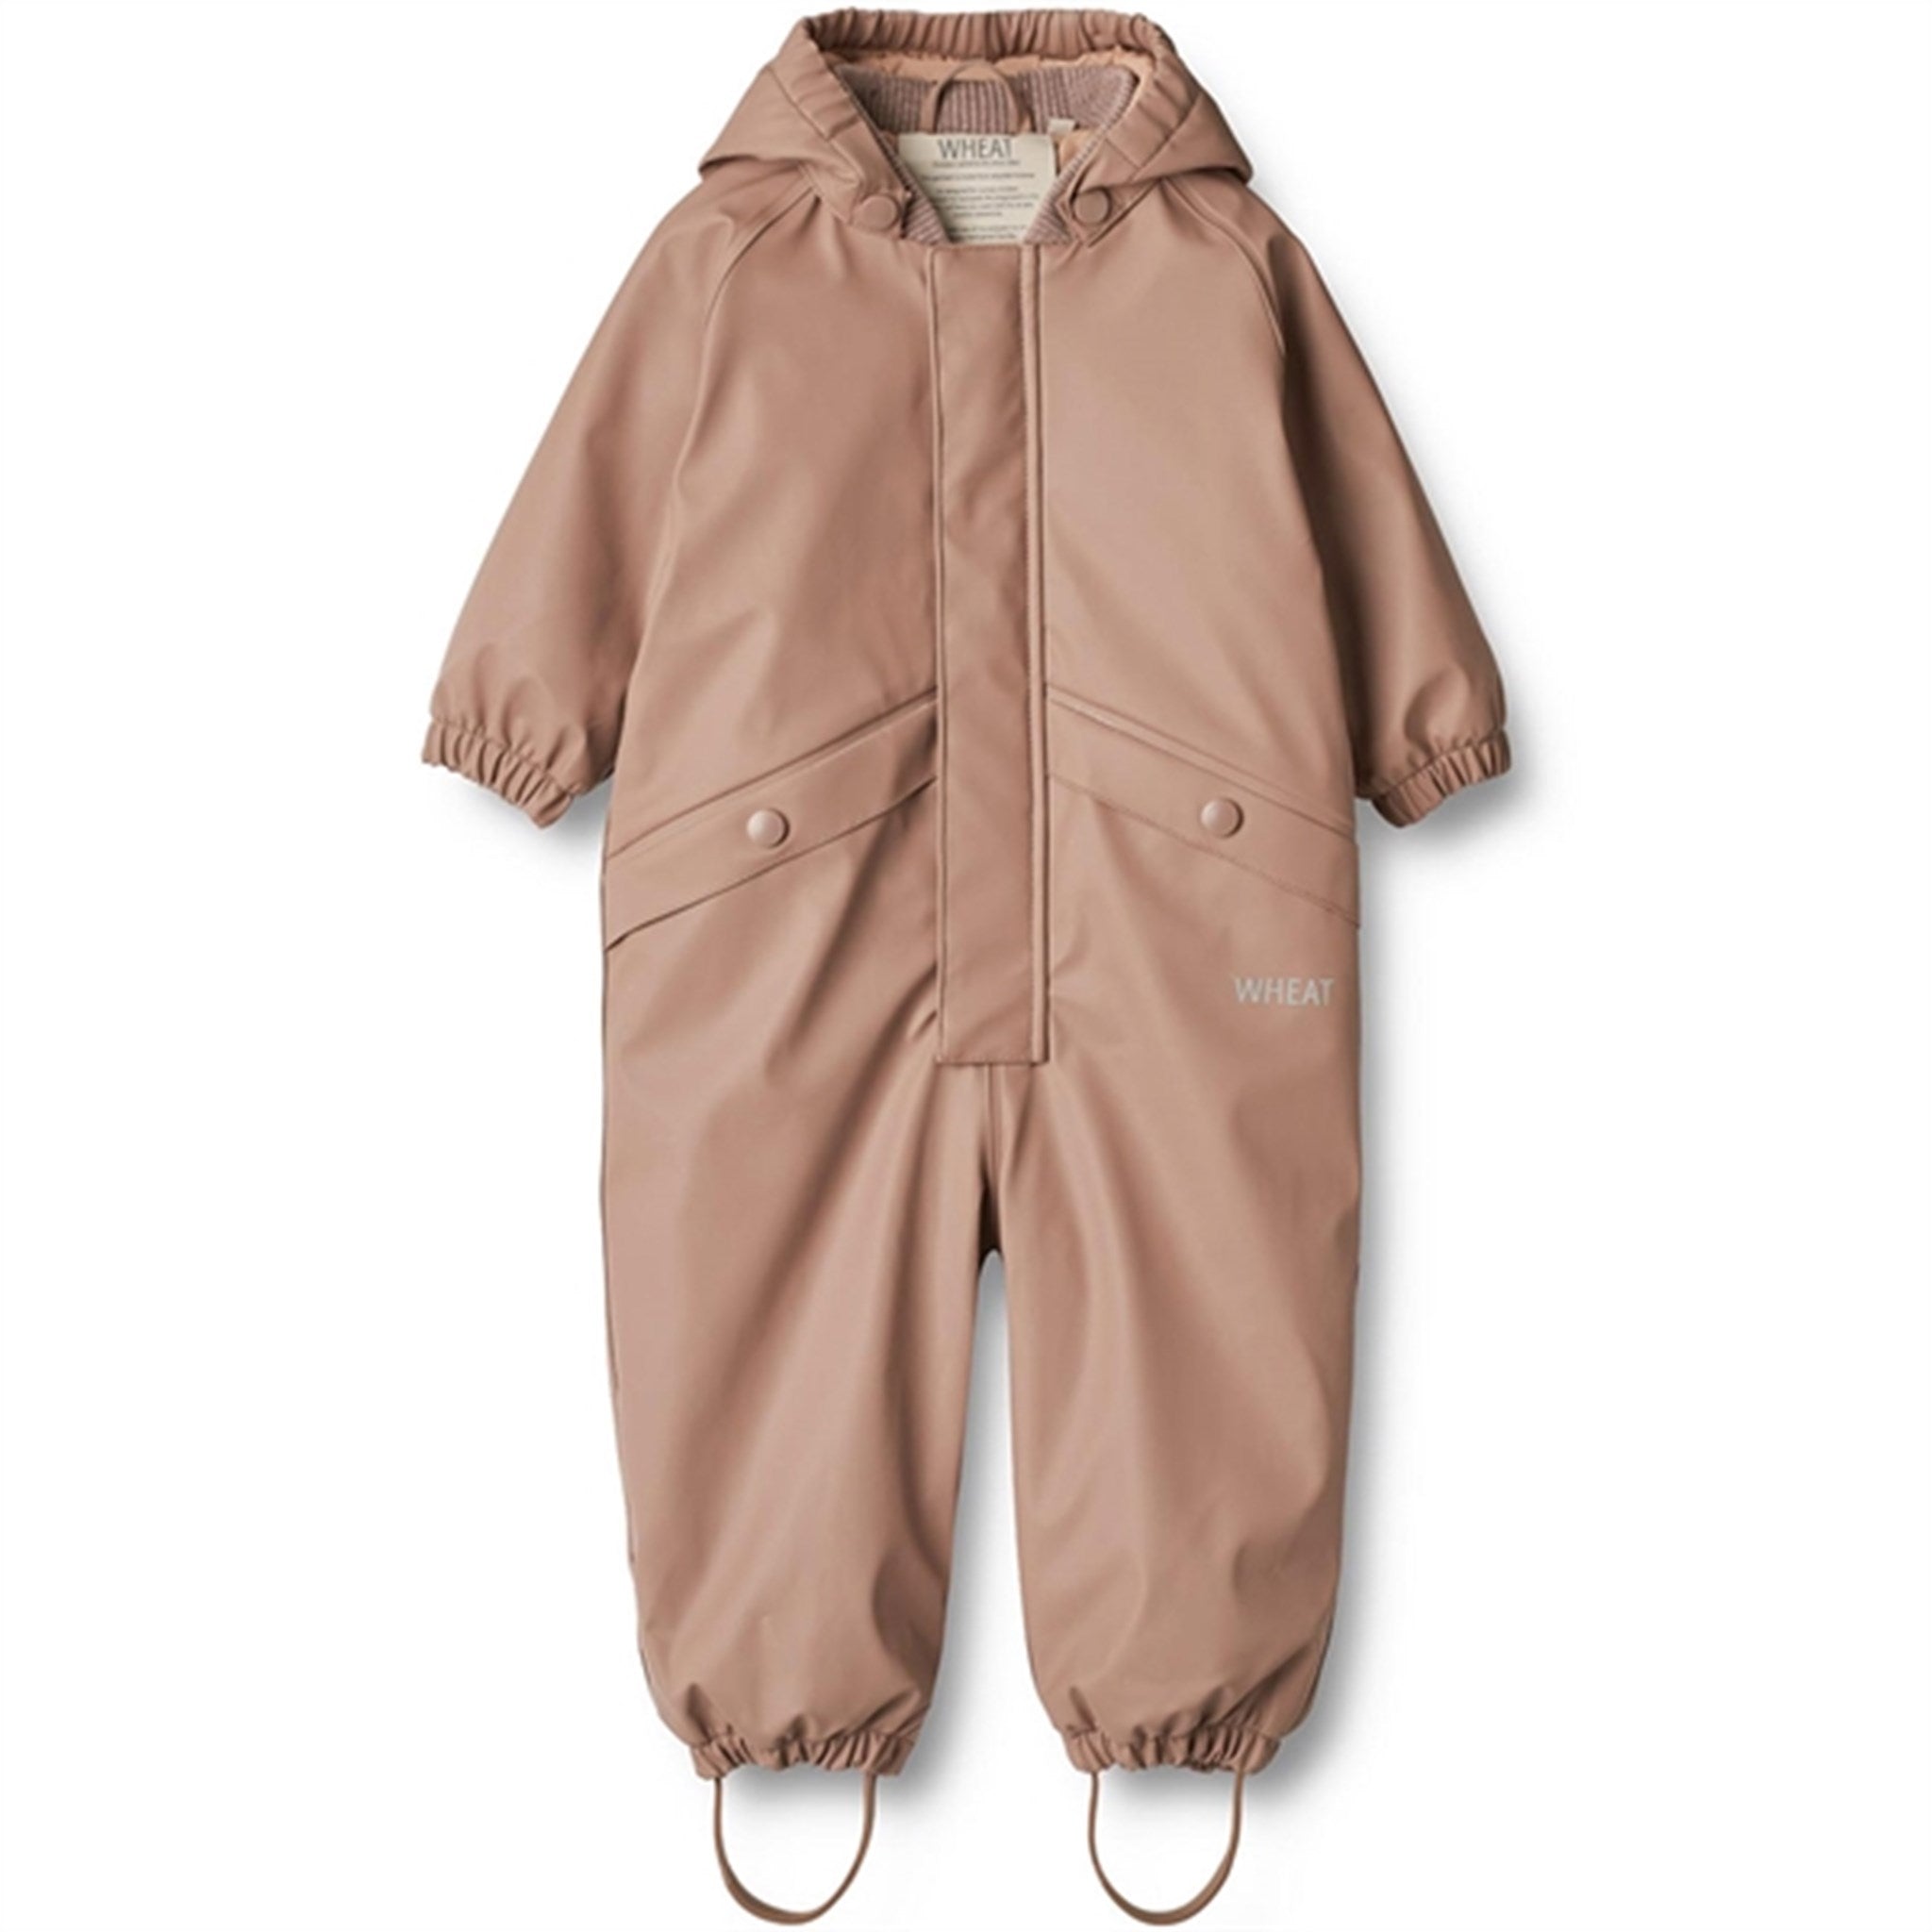 Wheat Rain Suit Aiko Thermo Lavender Rose